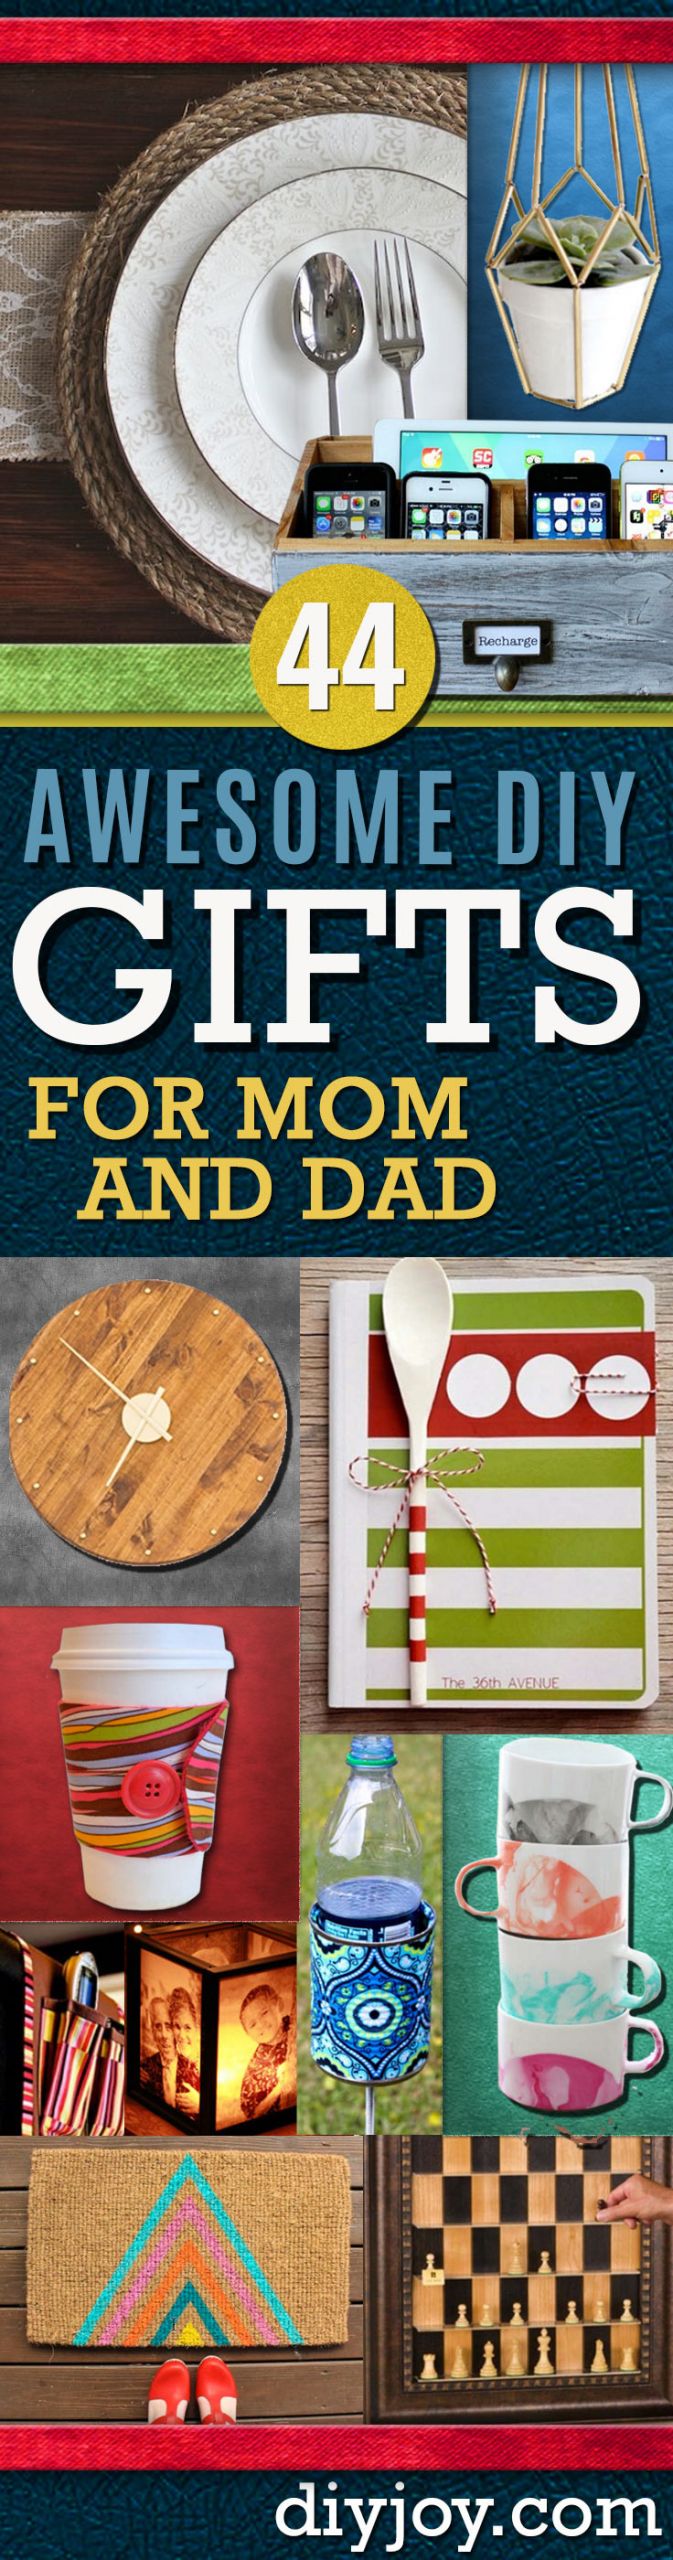 DIY Gifts For Your Dad
 Awesome DIY Gift Ideas Mom and Dad Will Love